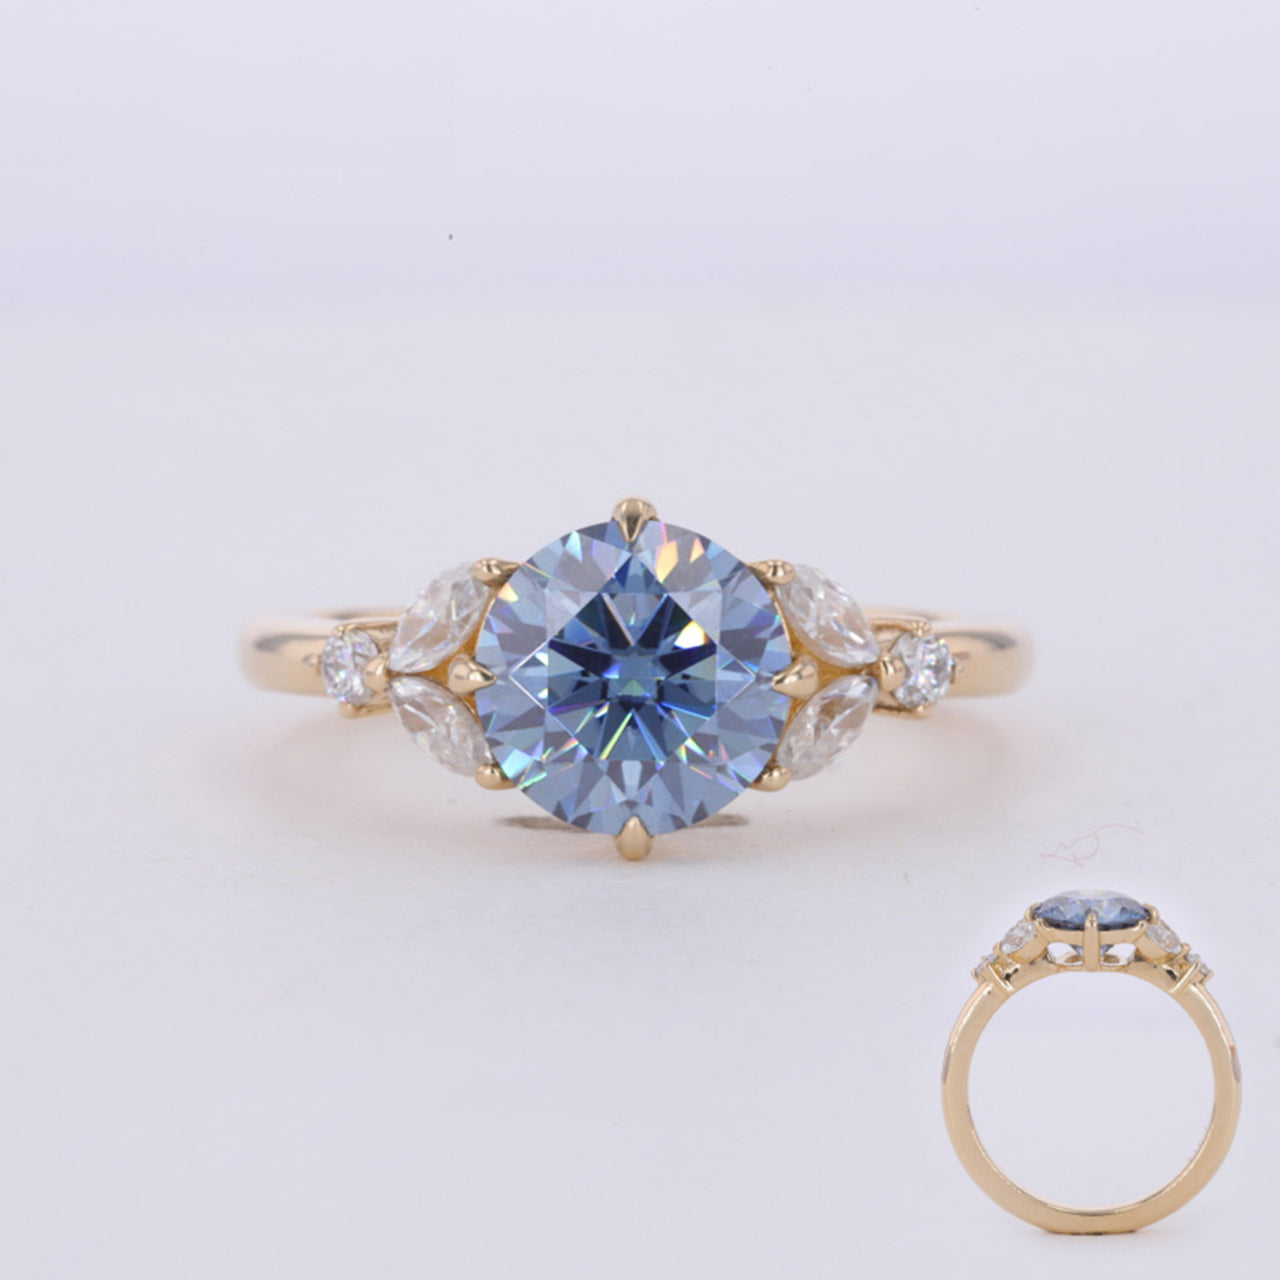 BLUE-GREY ROUND CUT MOISSANITE DIAMOND RING IN 10K SOLID GOLD